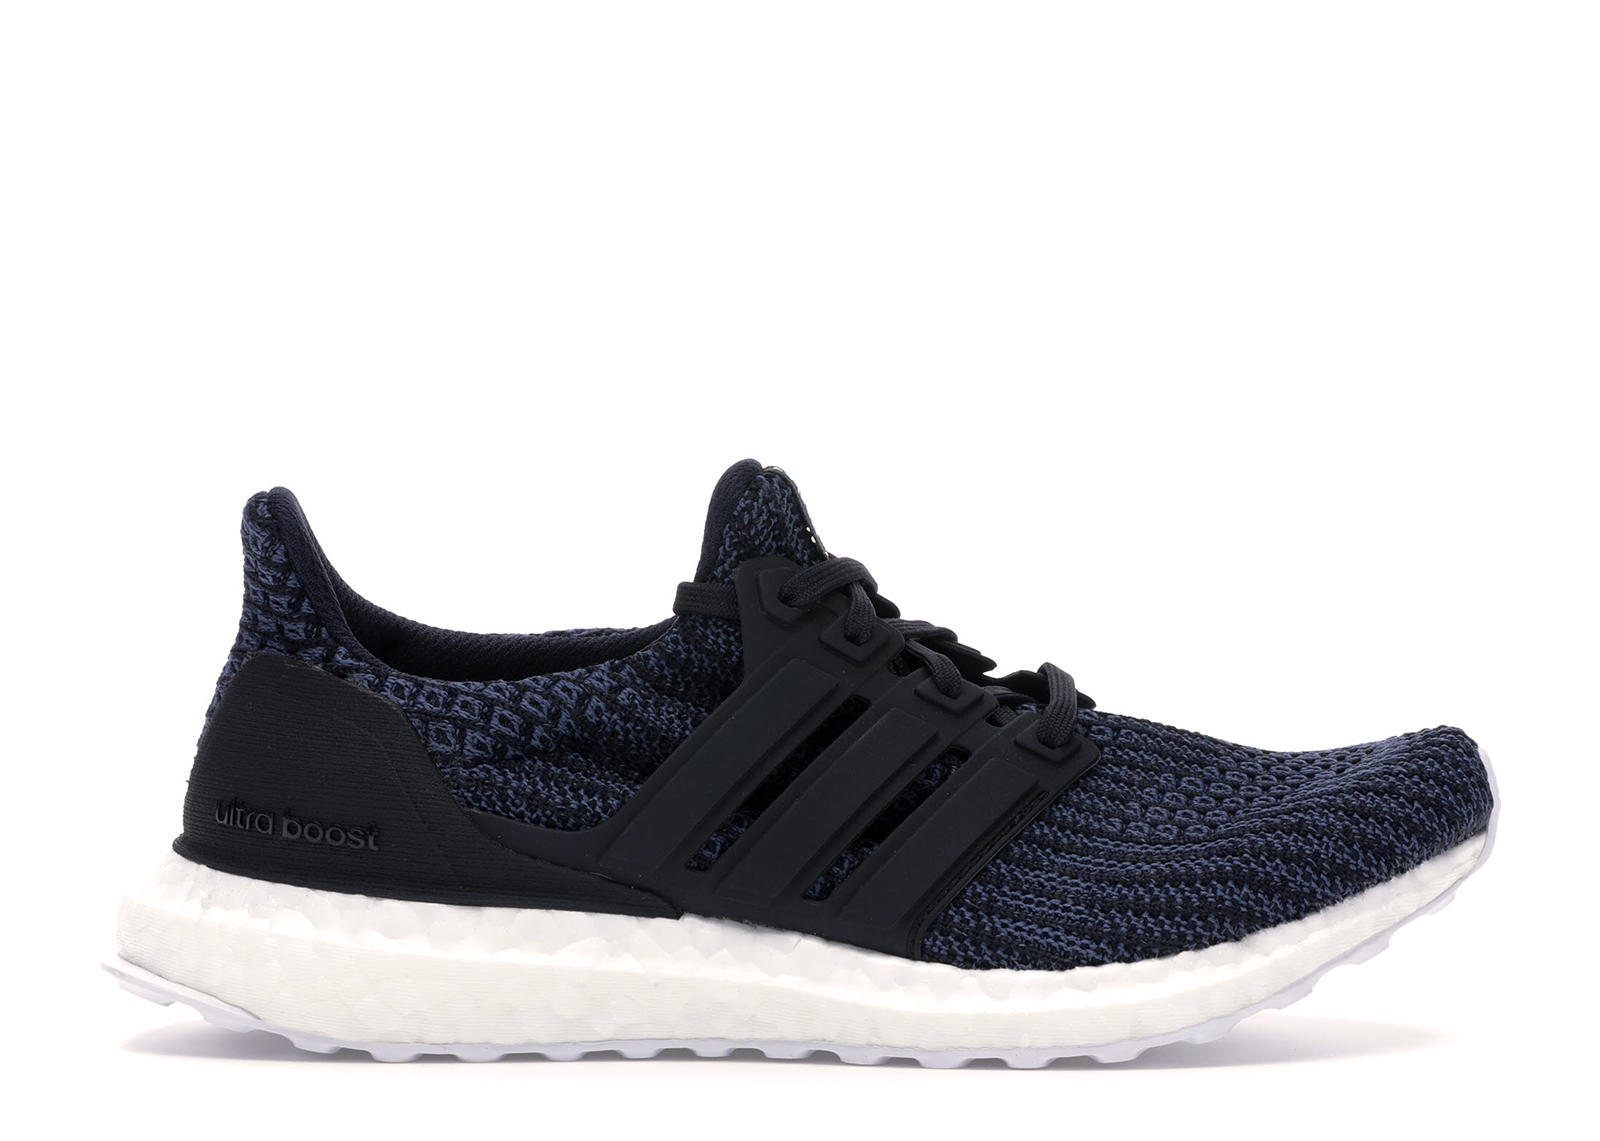 adidas Ultra Boost 4.0 Parley Carbon (Youth)